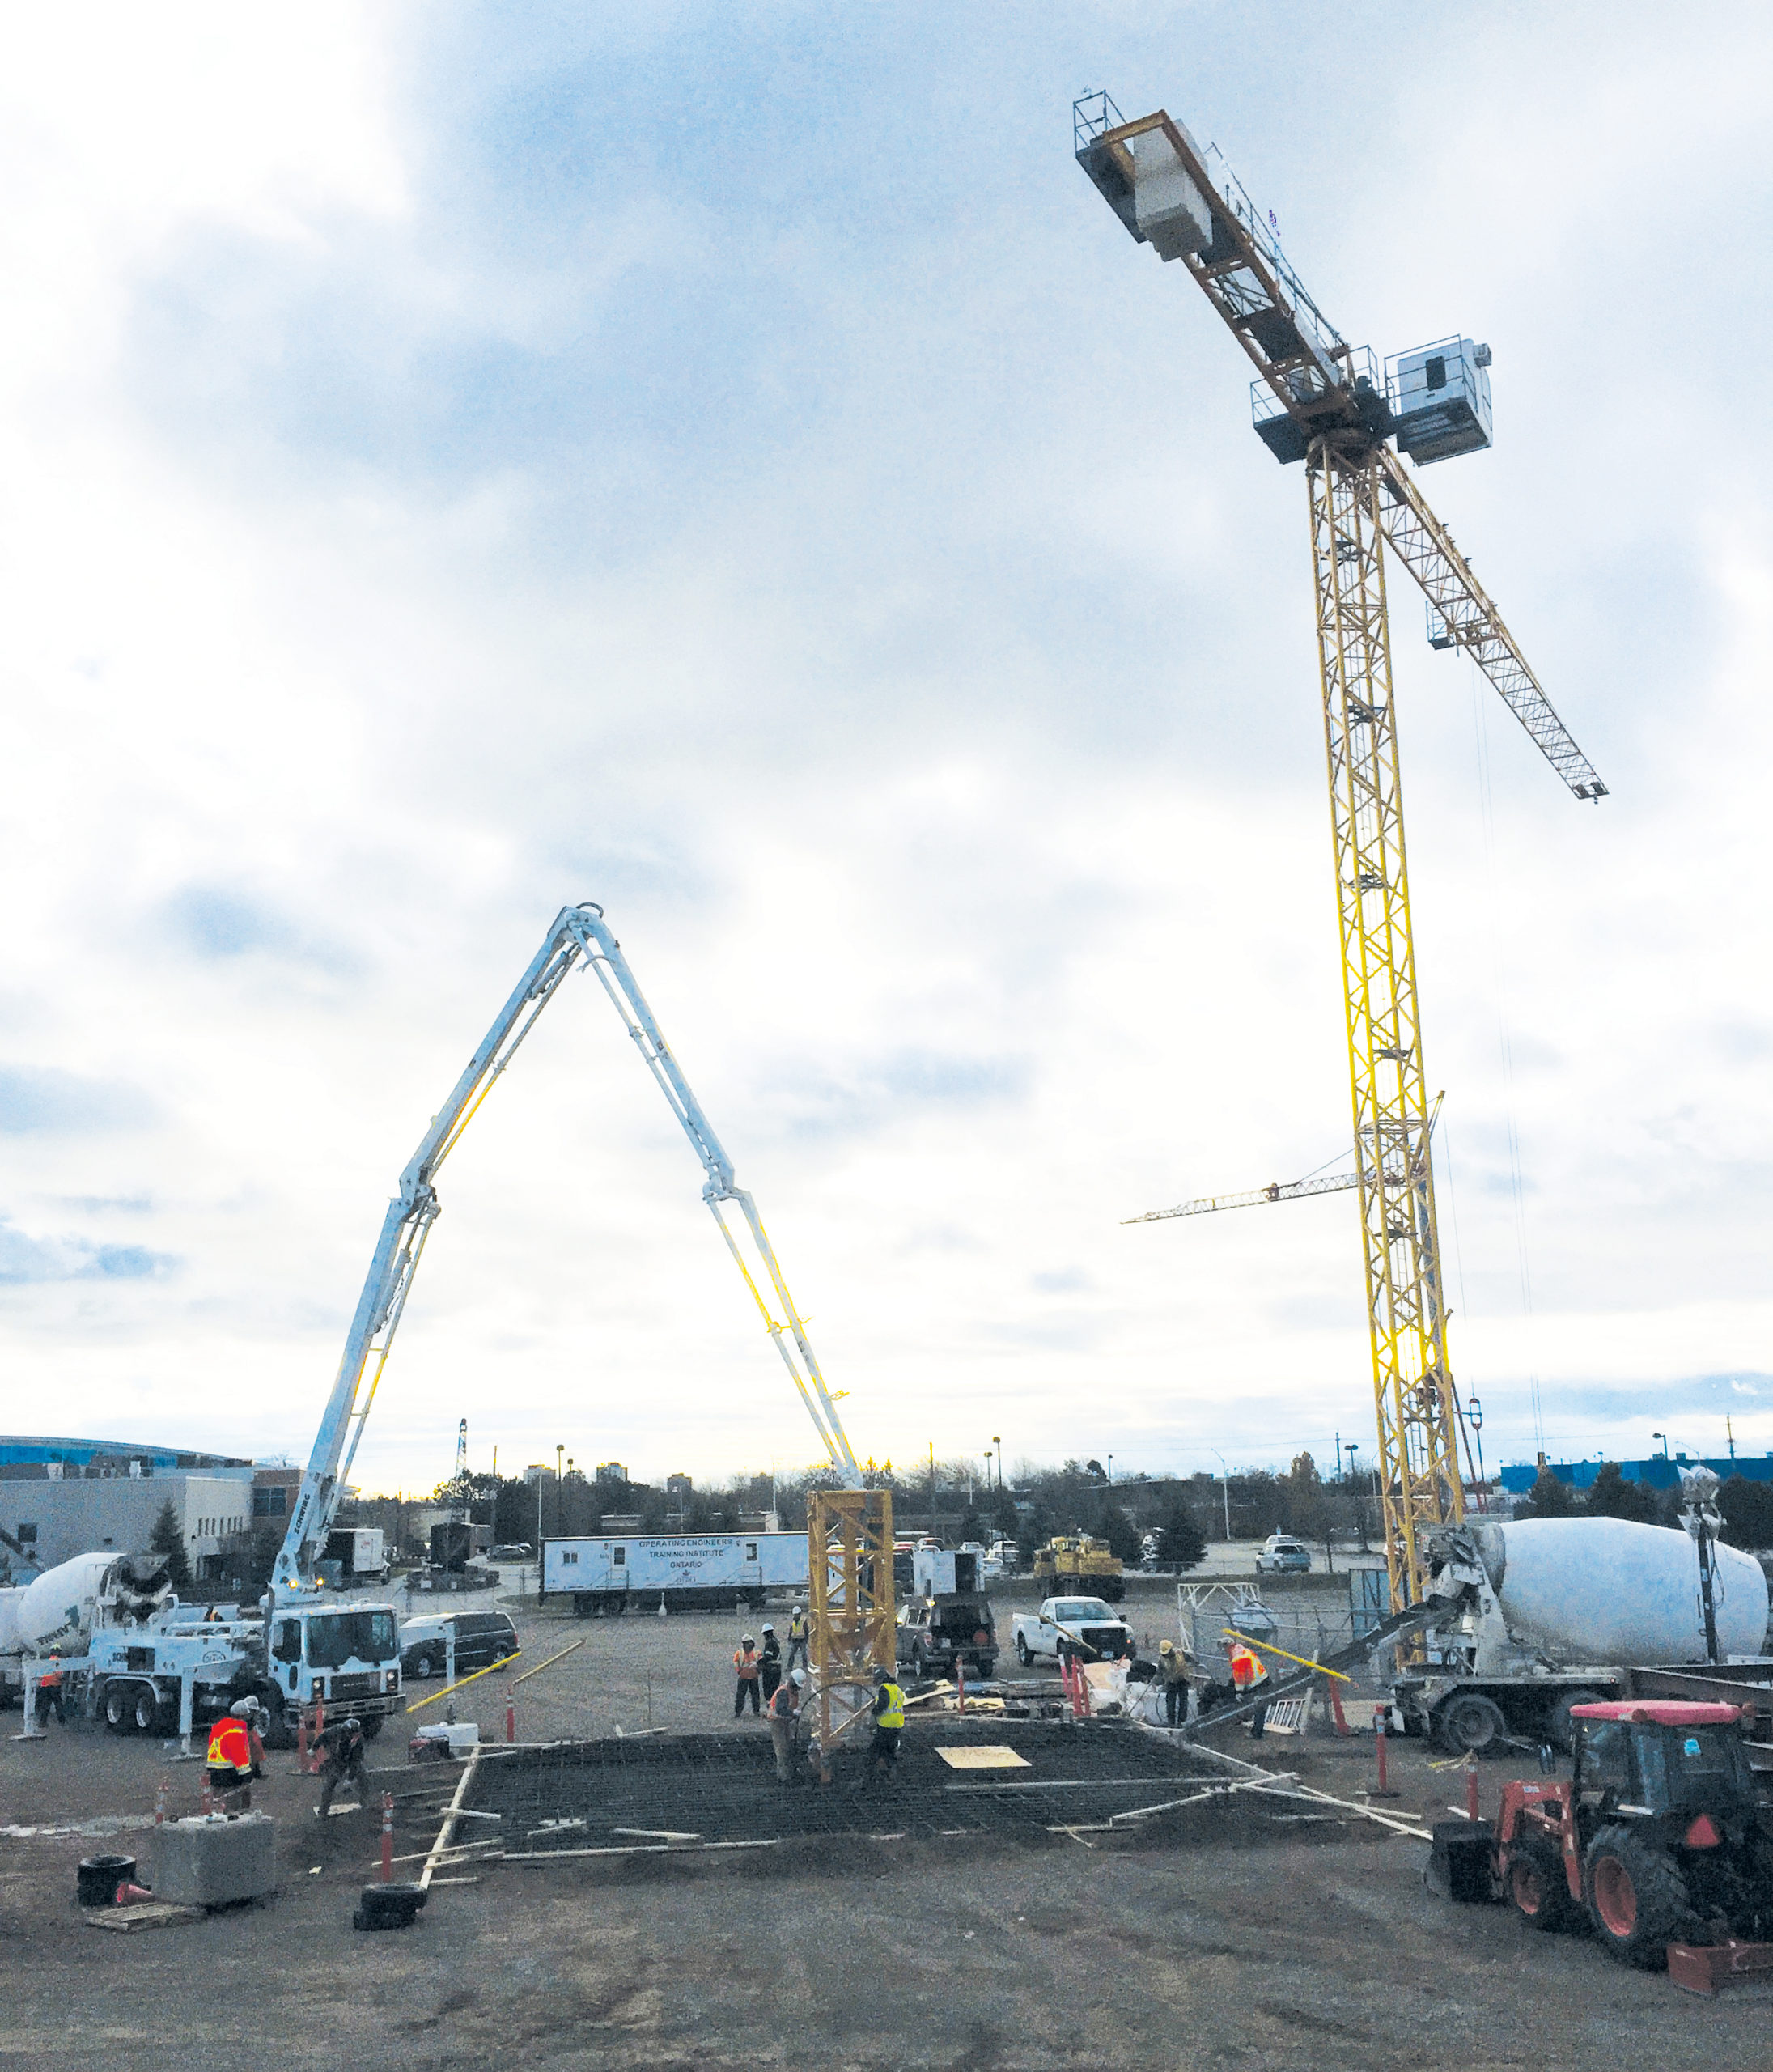 Concrete is poured for the new tower crane by member Craig Agar.